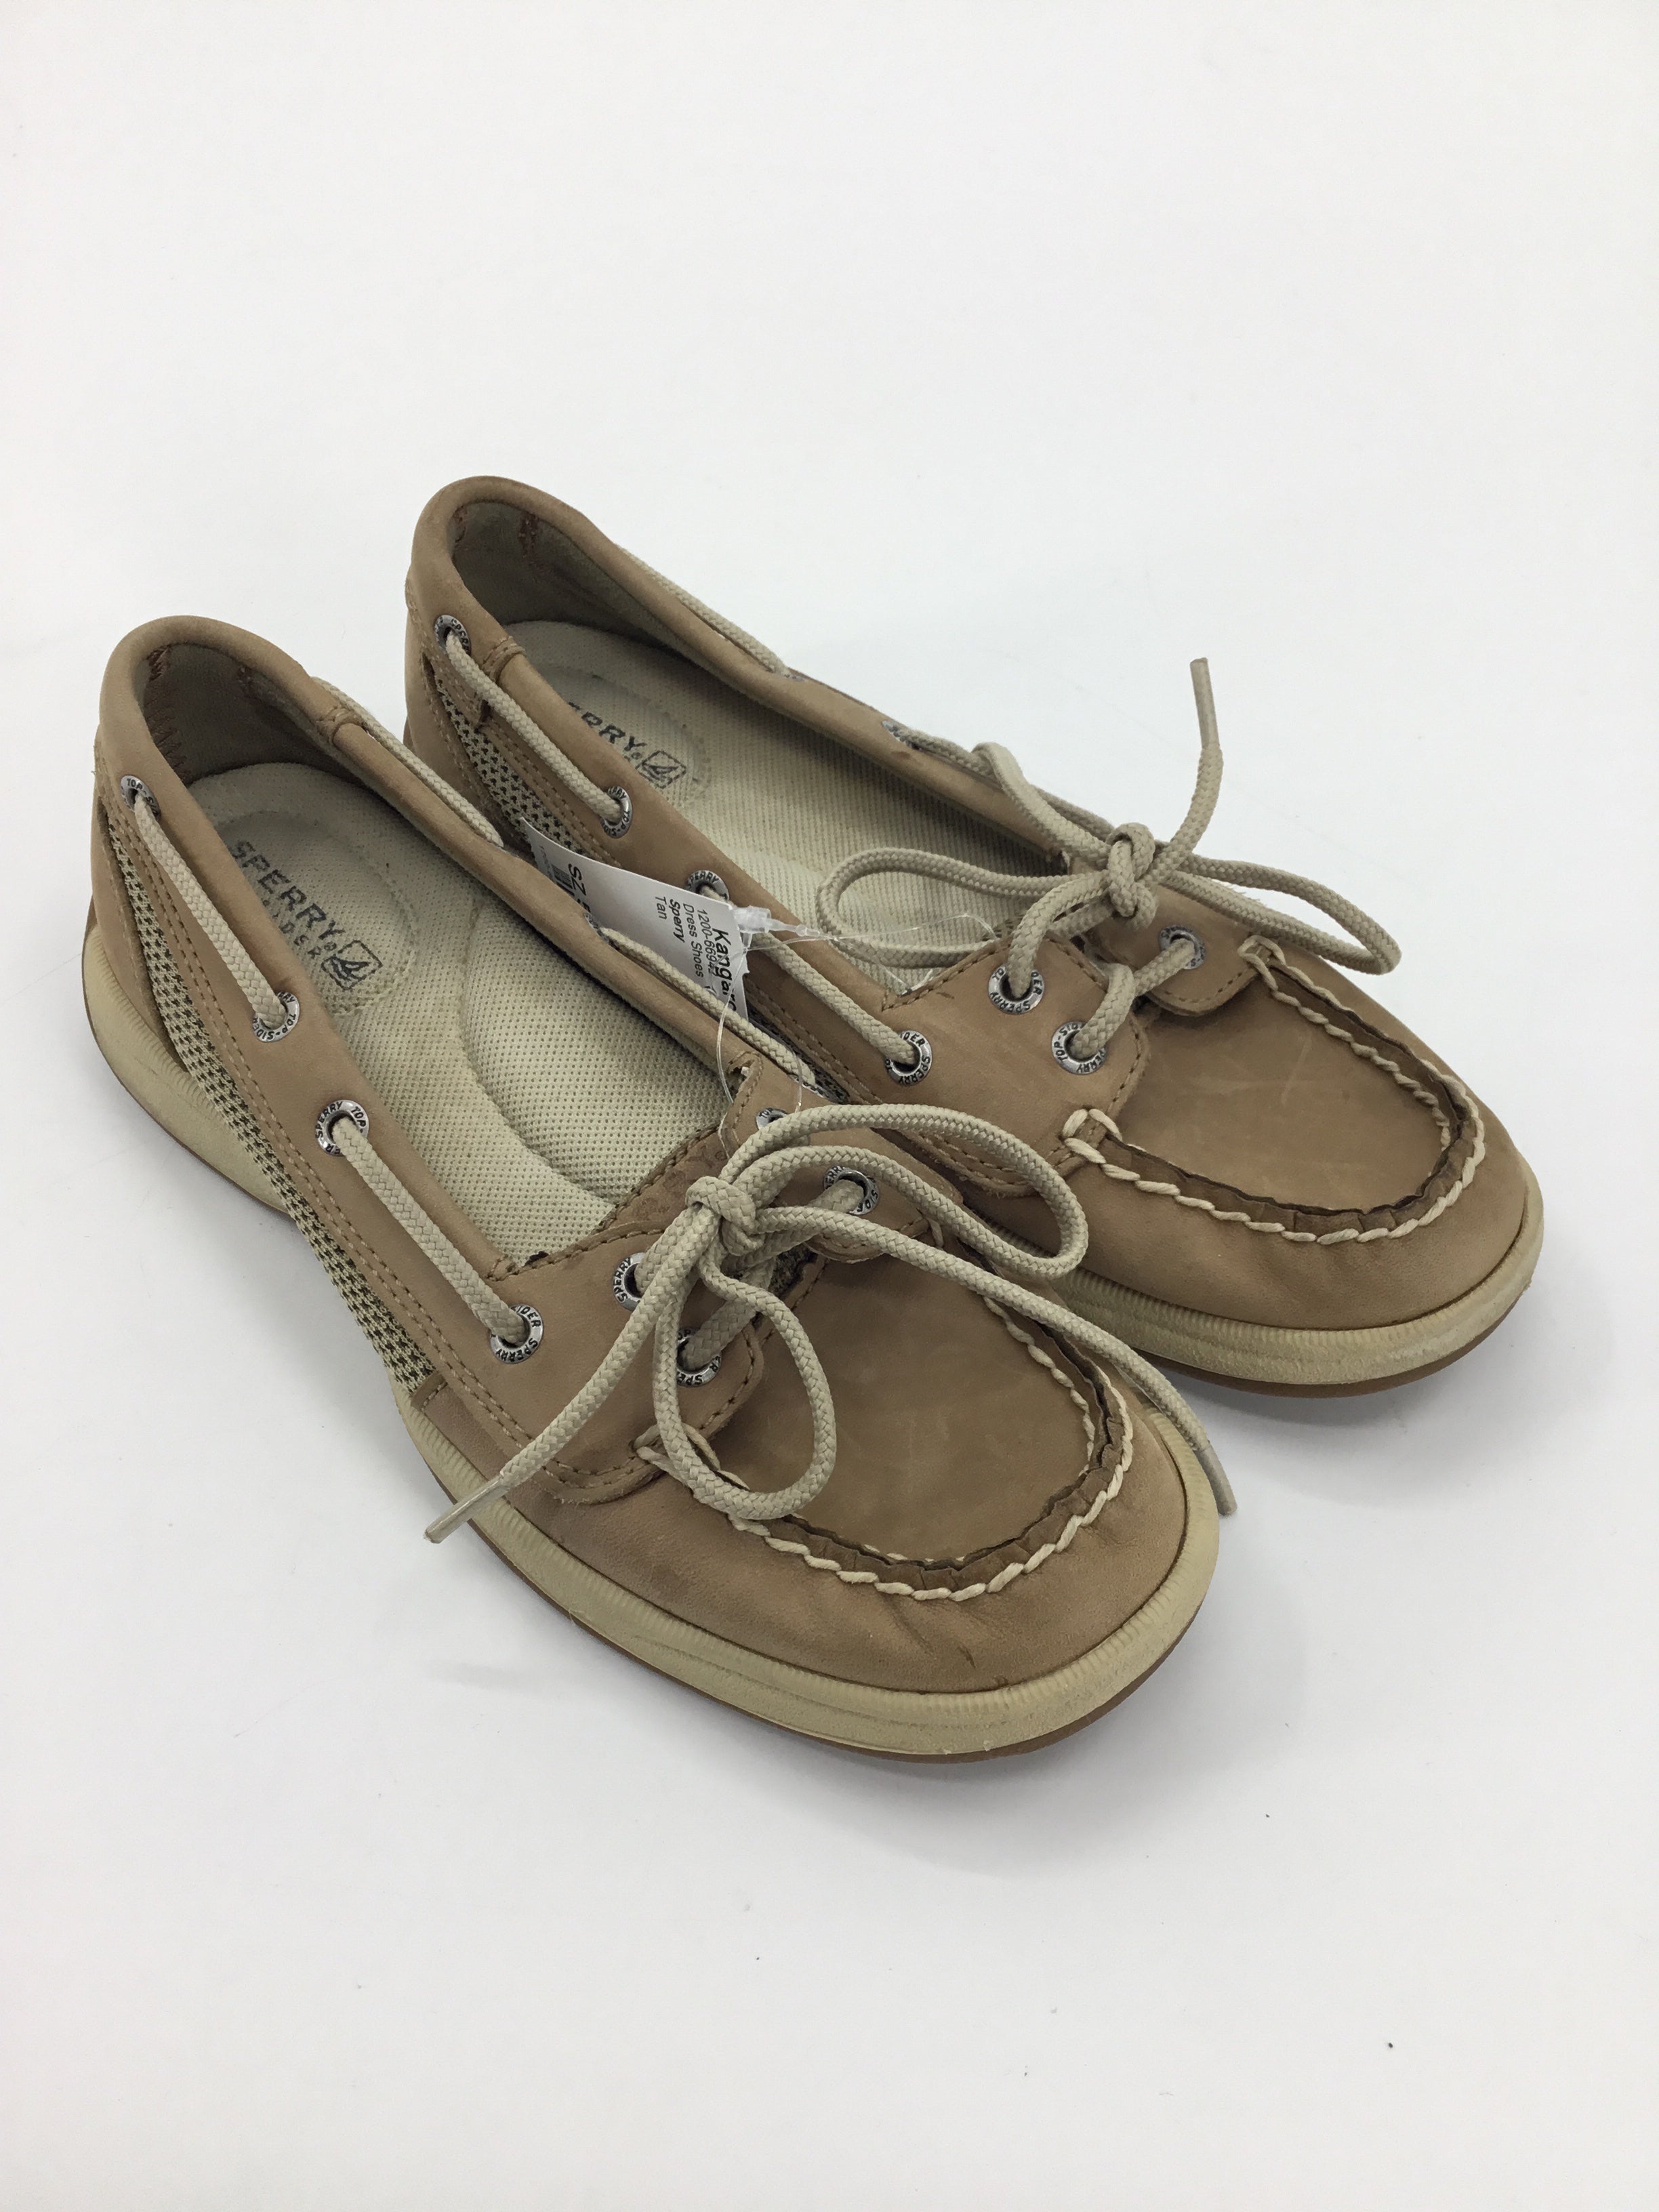 Sperry Child Size 5.5 Youth Tan Dress Shoes